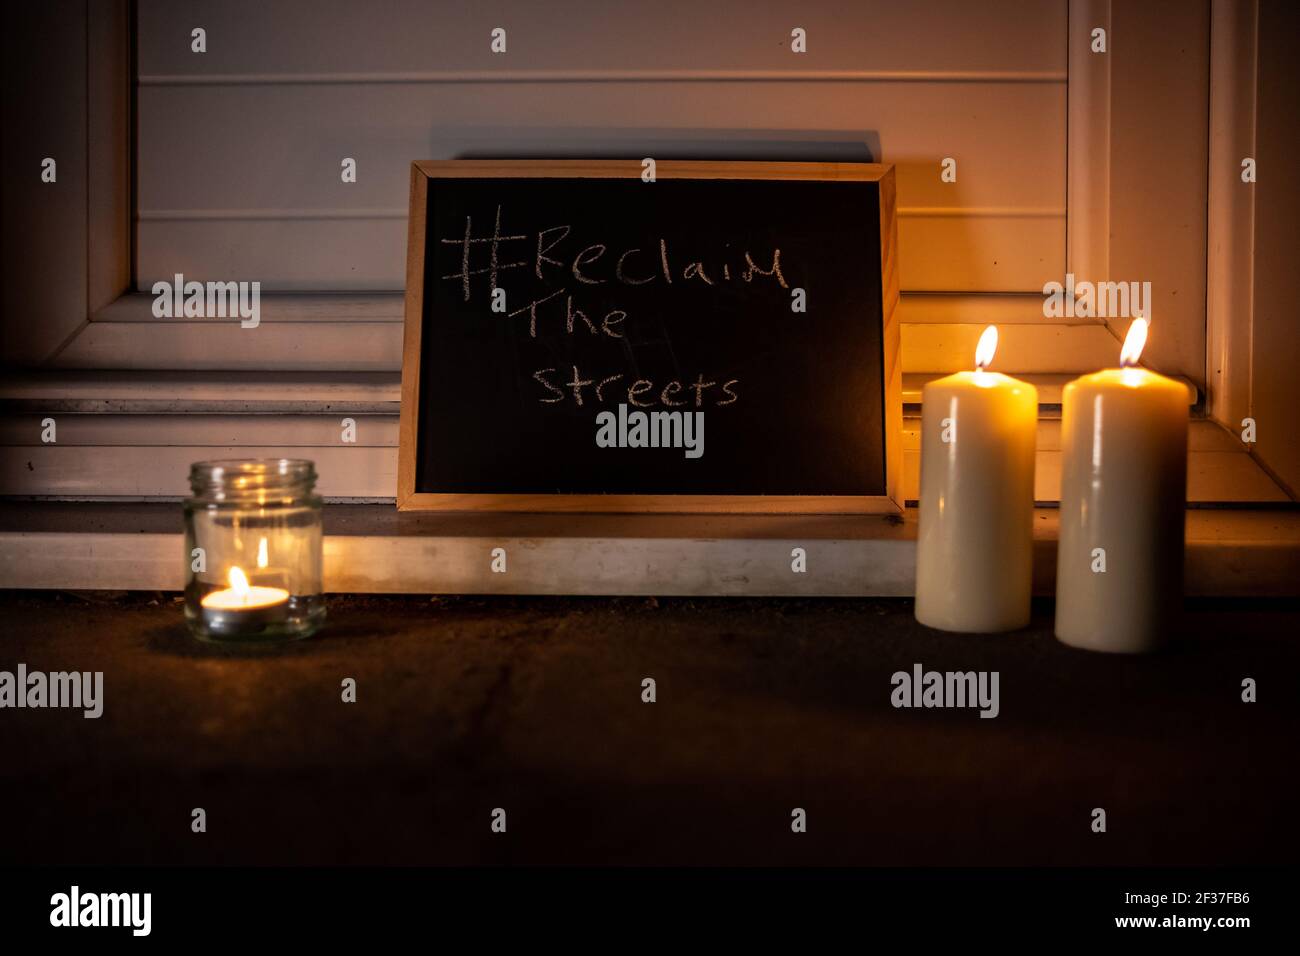 Chalk board with Reclaim the streets. Two large candles. One small tea light in a jar. Stock Photo